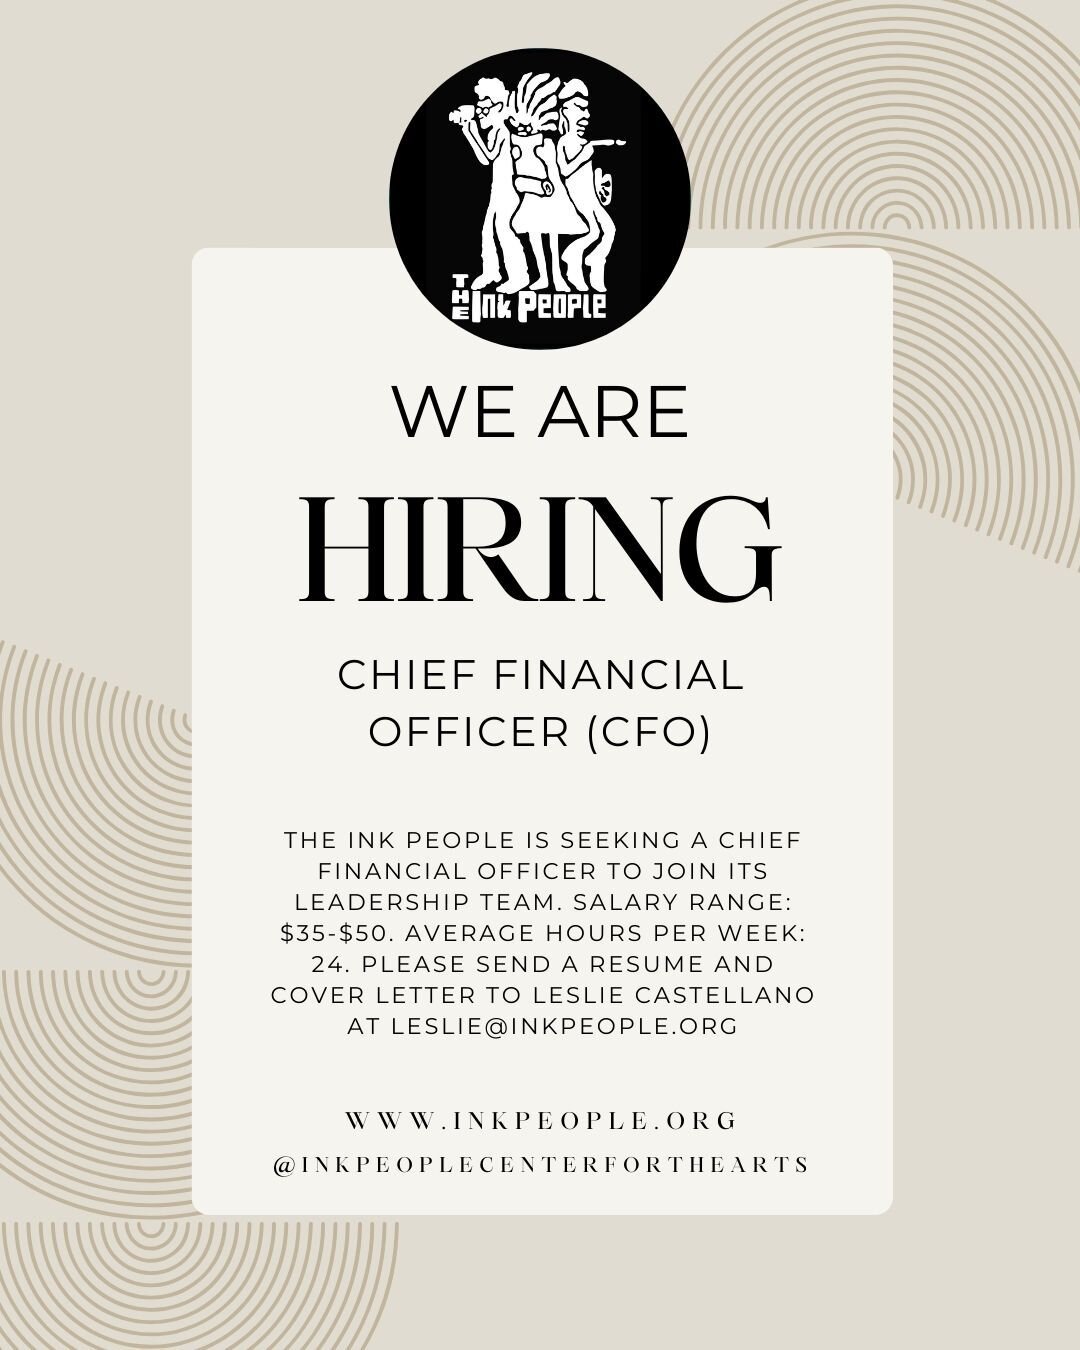 We're hiring! 

The Ink People is seeking a Chief Financial Officer to join its leadership team. Salary range: between $35-$50, depending on experience. Average hours per week: 24.  Please send a resume and cover letter to Leslie Castellano at Leslie